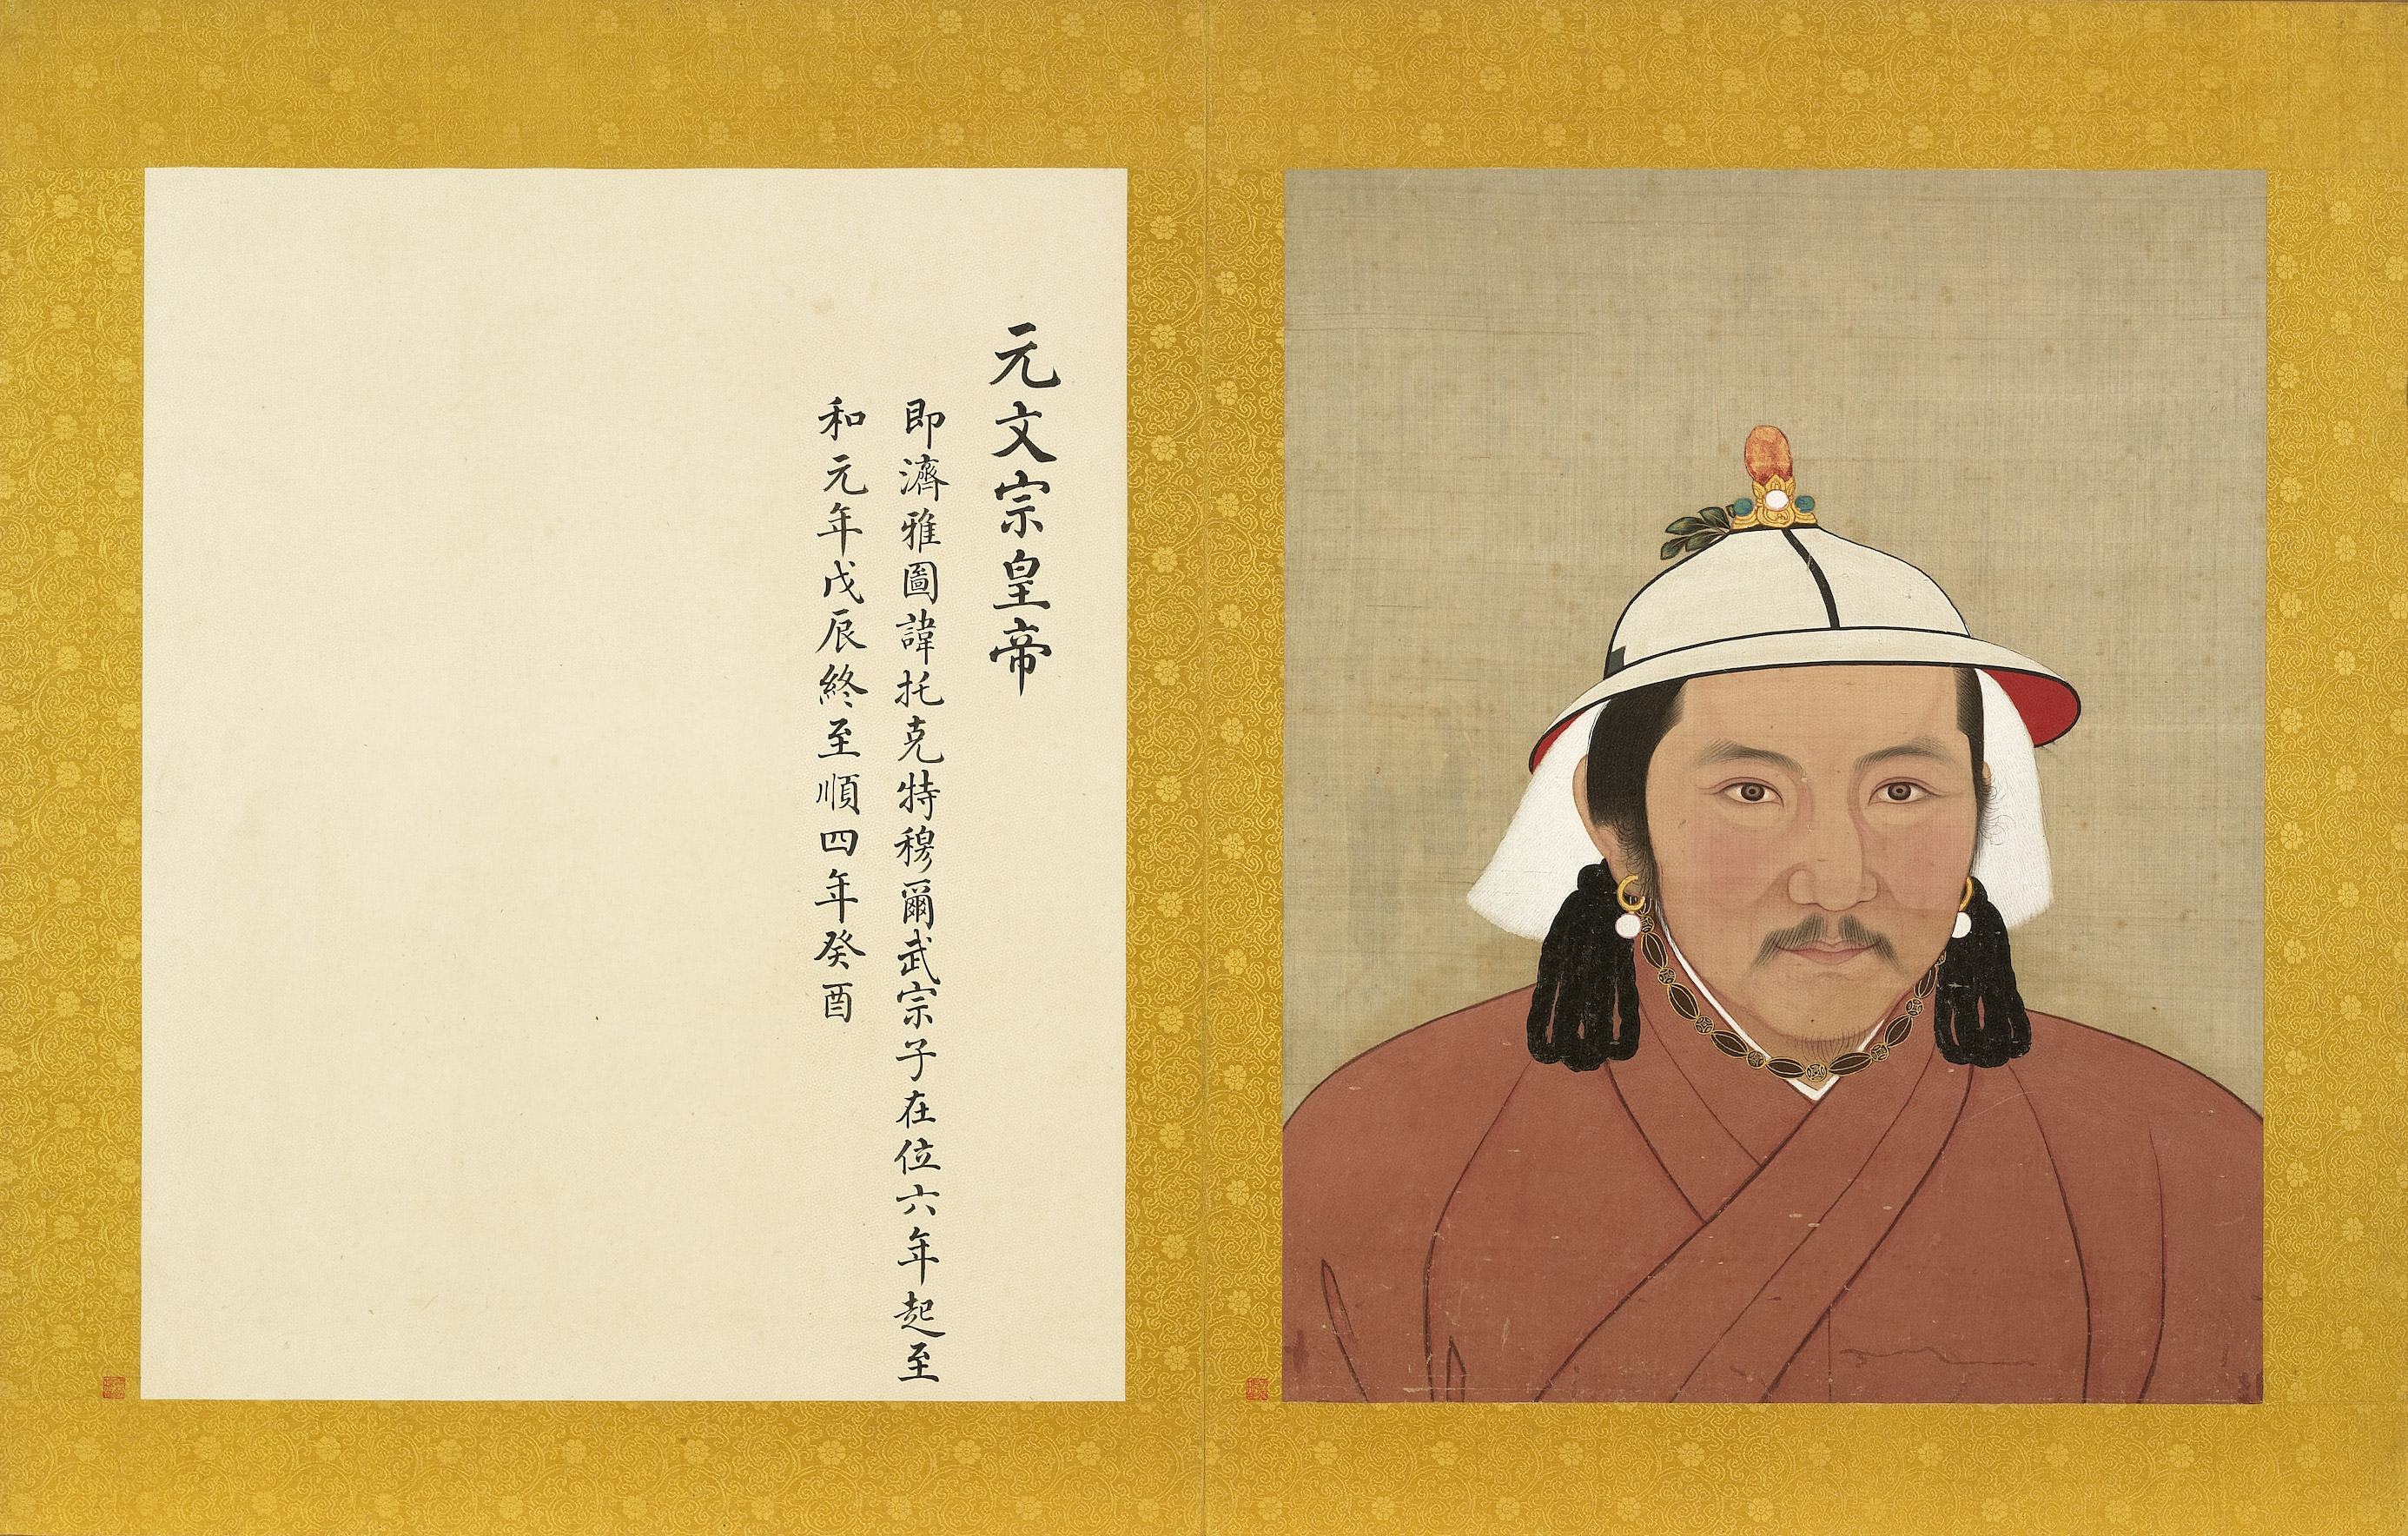 Bust Portrait of the Yuan Emperor Wenzong